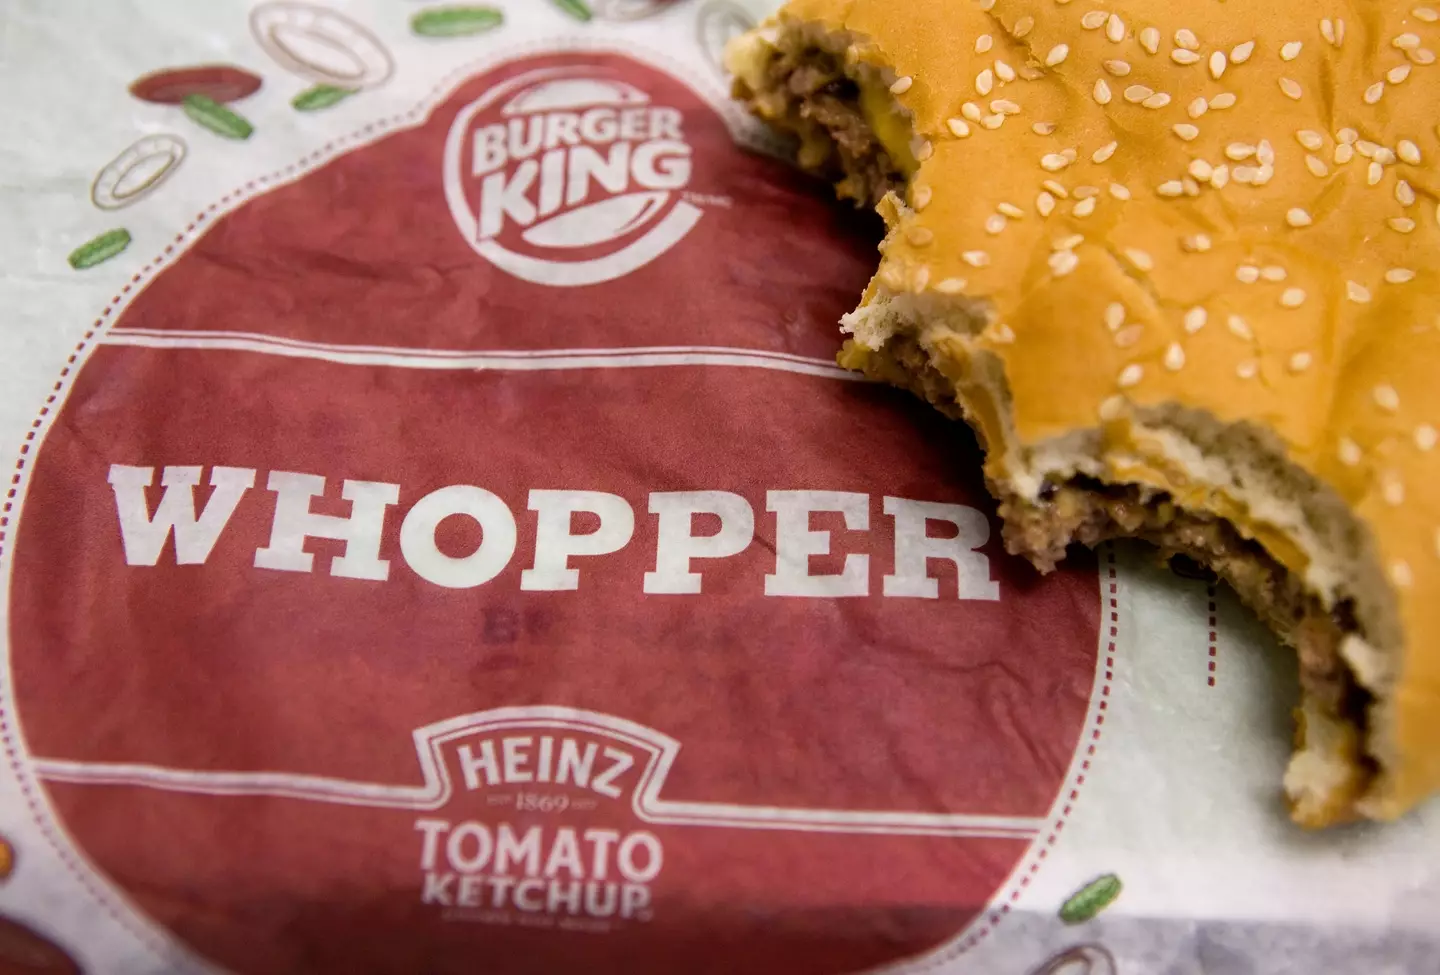 You can get a free Whopper from Burger King this month.